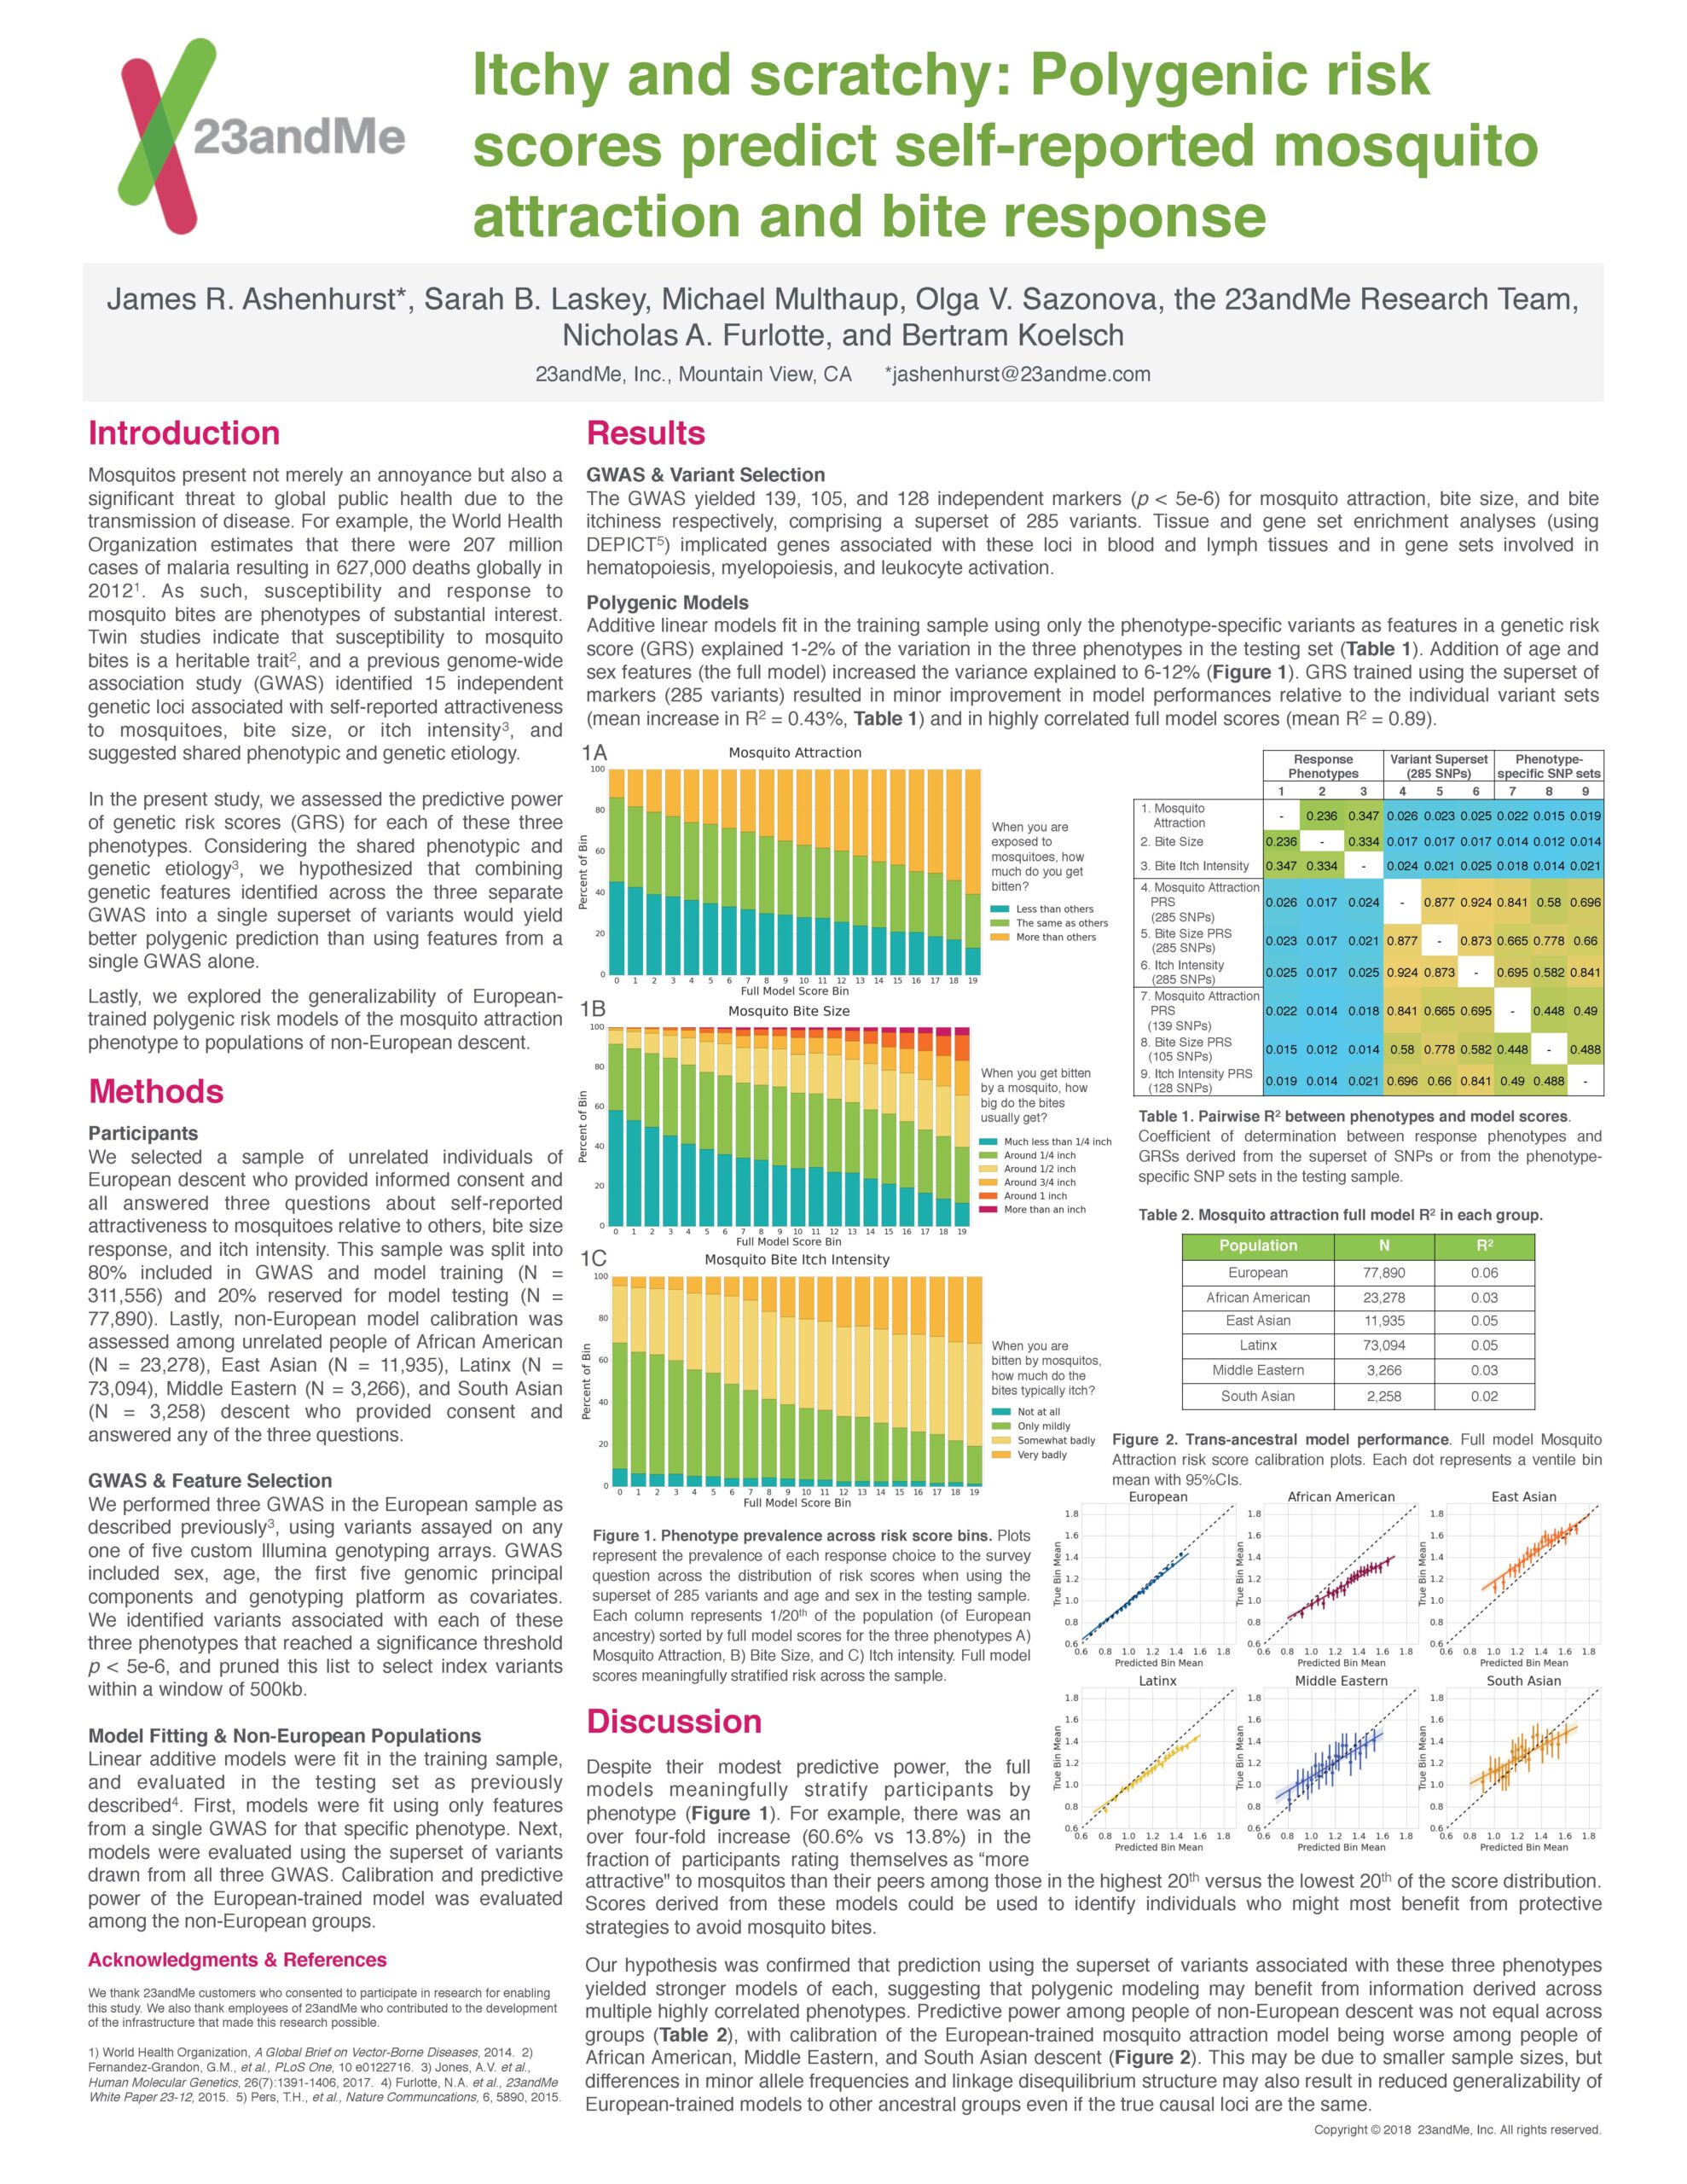 A poster showing the polygenic risk scores for self-reported mosquito attraction and bite response.